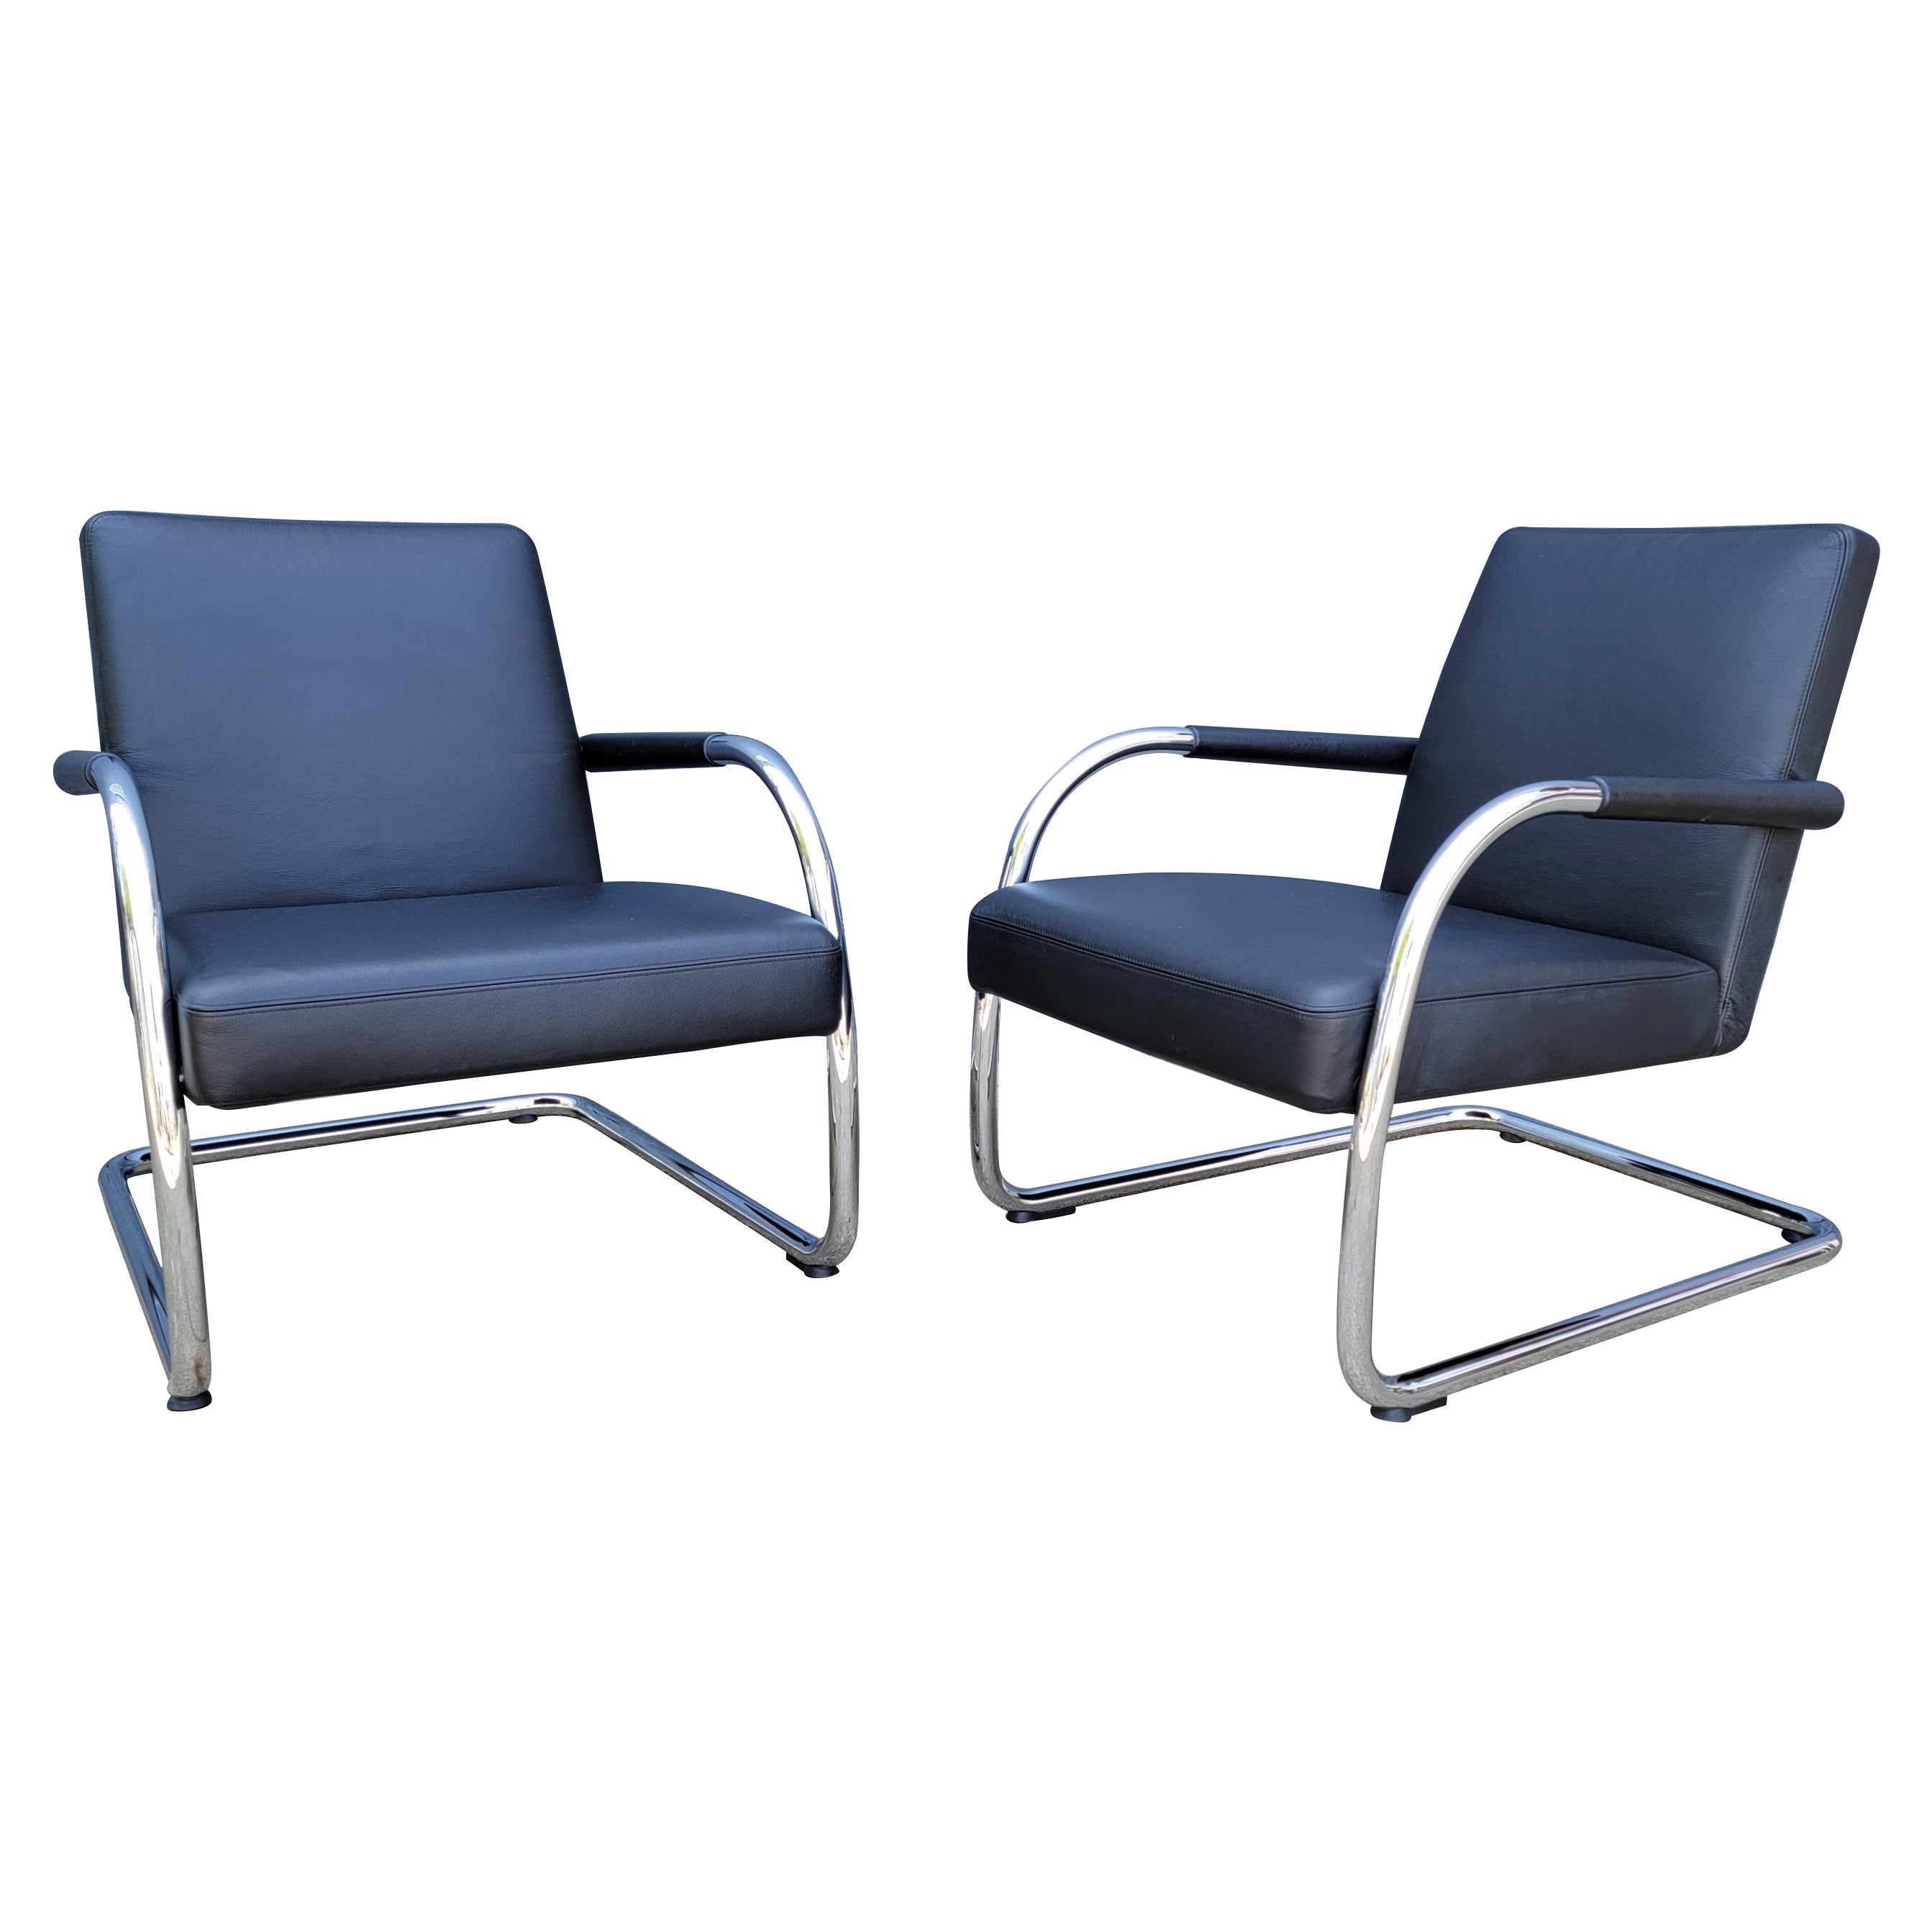 Antonio Citterio for Vitra Leather & Chrome Lounge Chairs